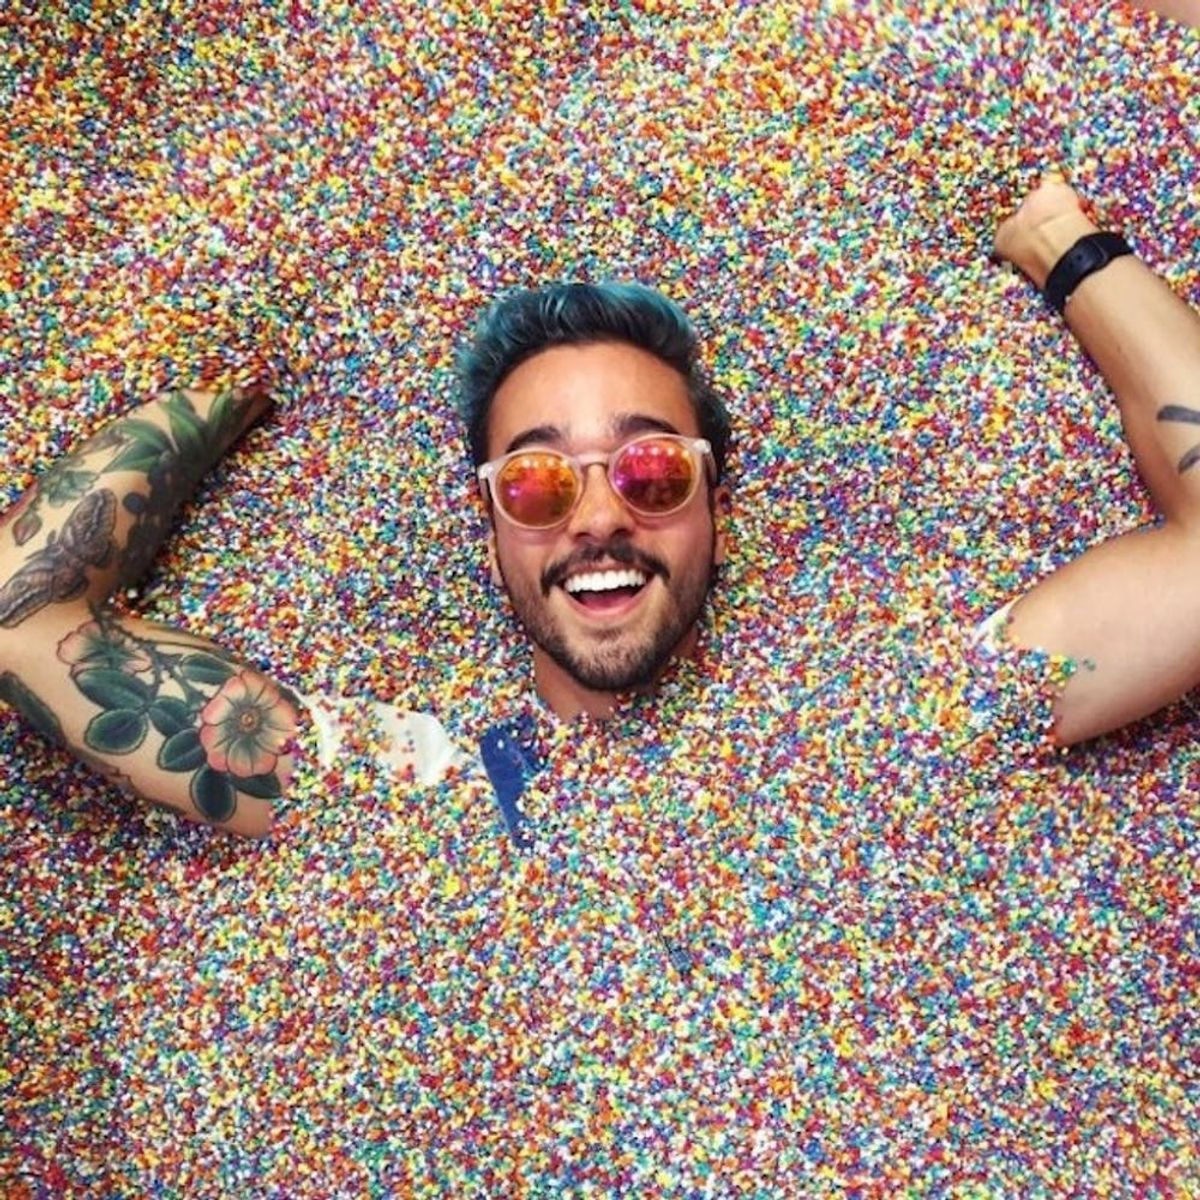 This Rainbow-Filled Instagram Will Brighten Up Any Day